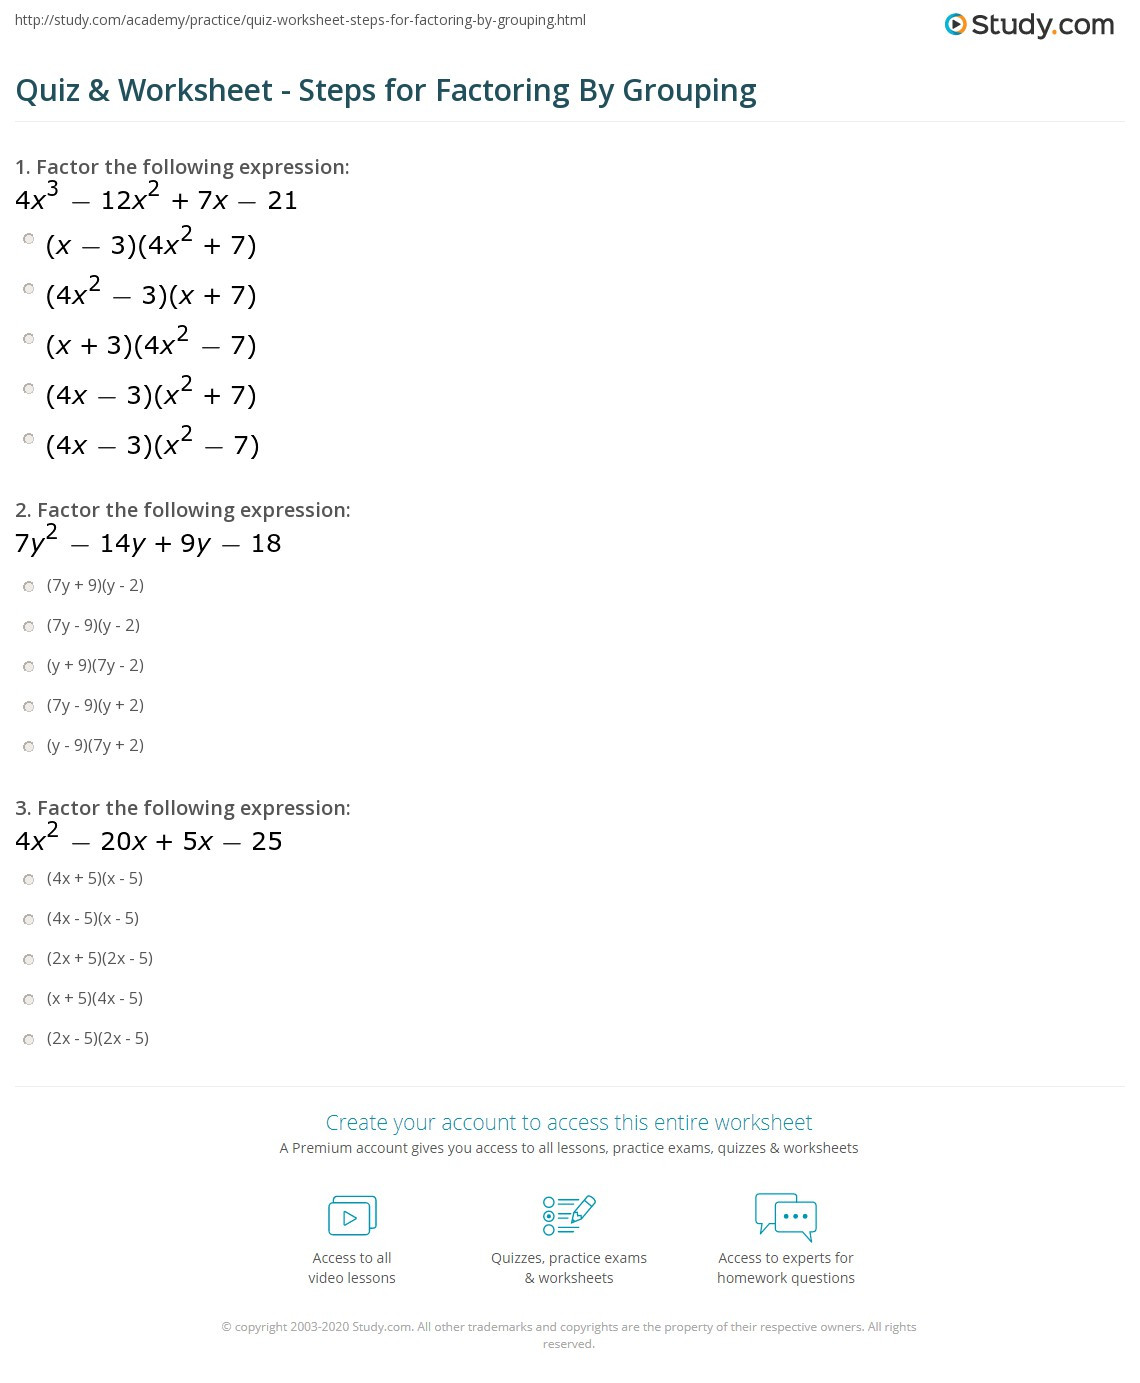 Factoring by Grouping Worksheet Answers Quiz &amp; Worksheet Steps for Factoring by Grouping